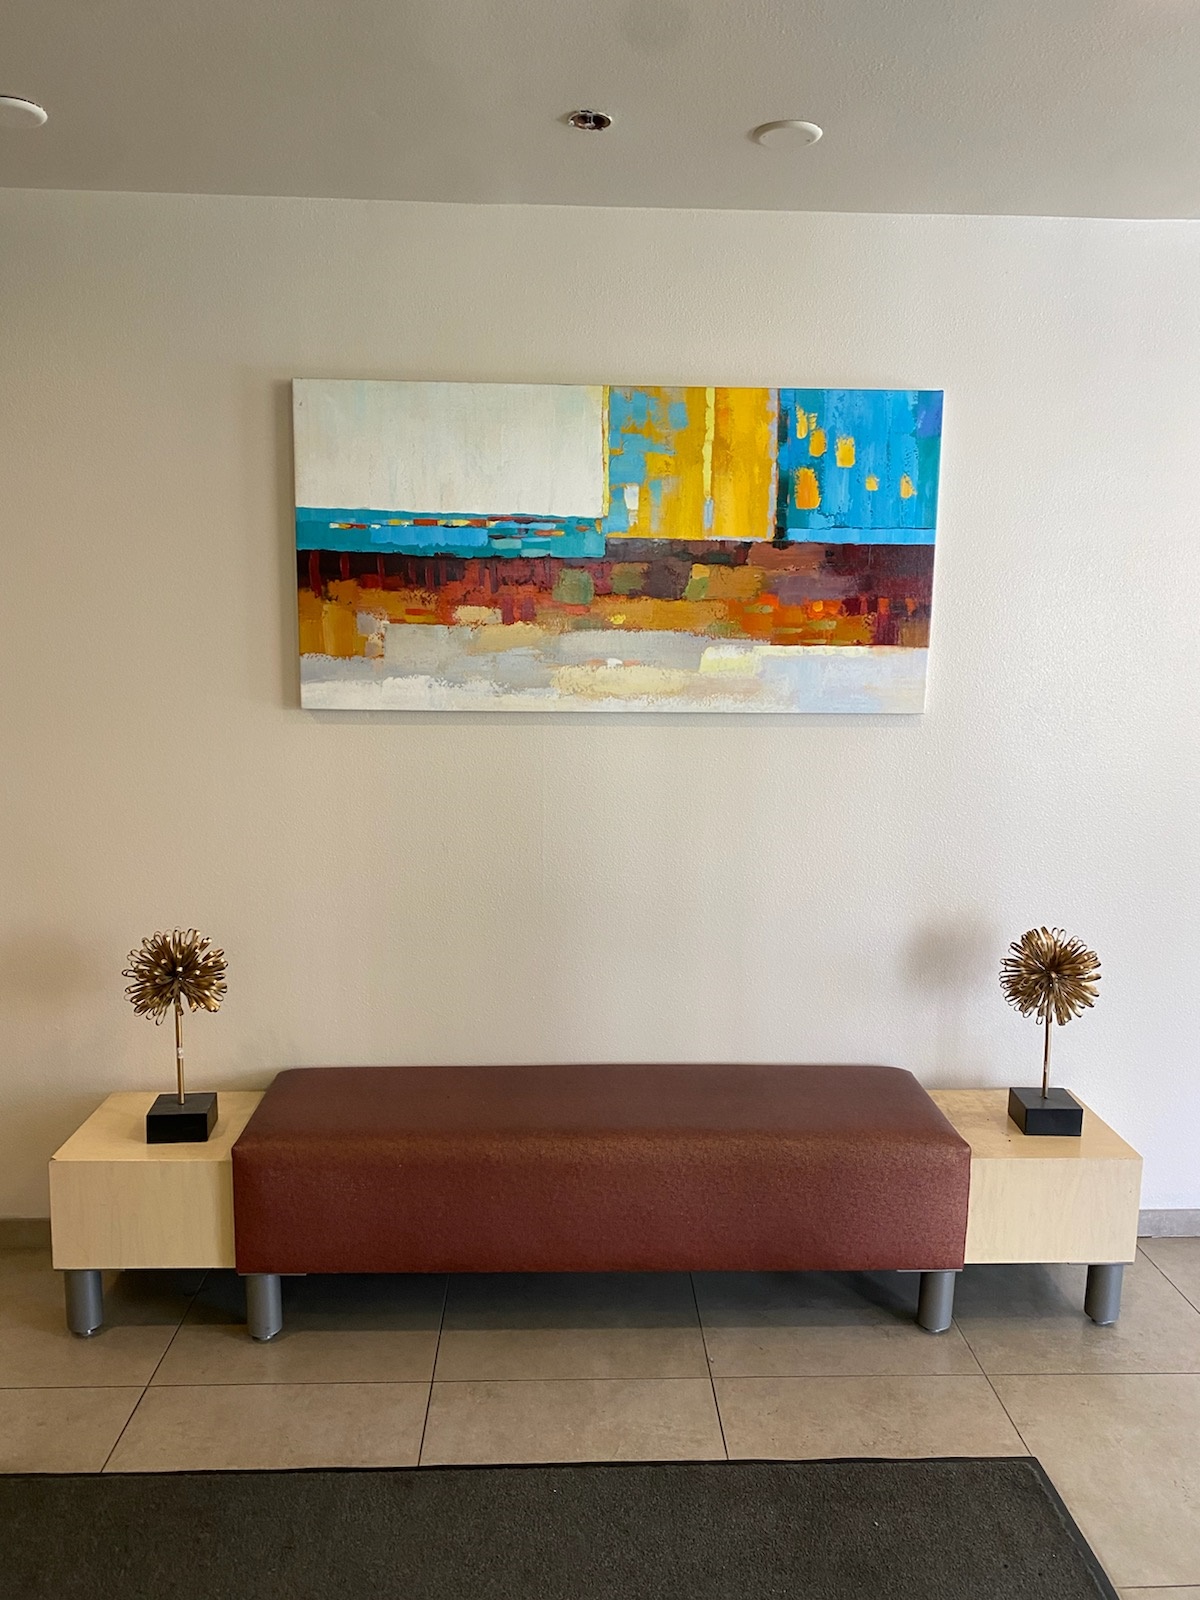 Lobby area with a bench and a multicolored painting on the wall.